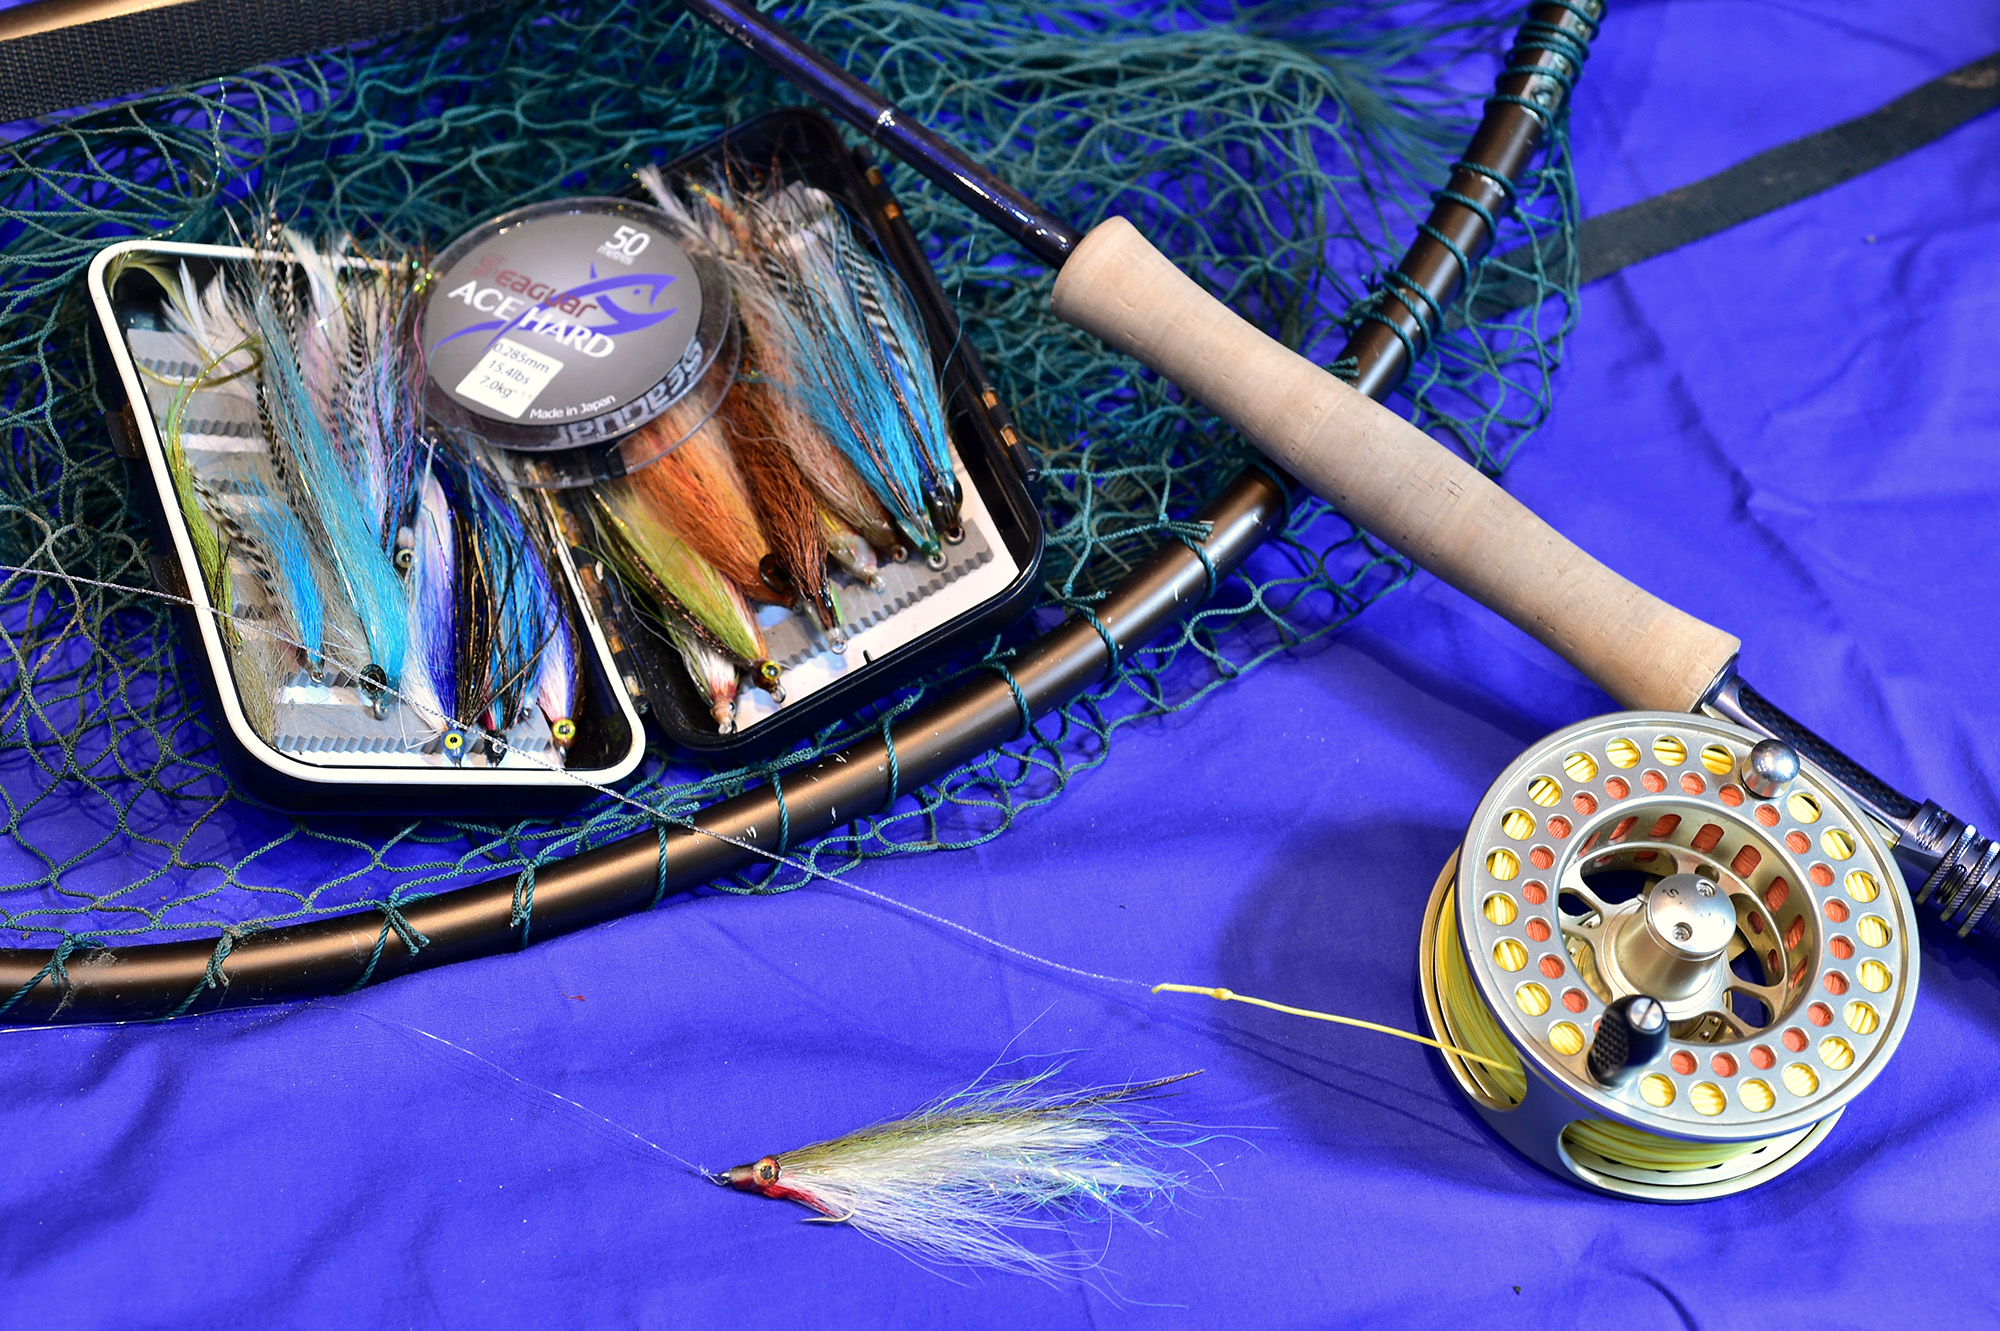 16 Saltwater fly fishing gear, everything you need2